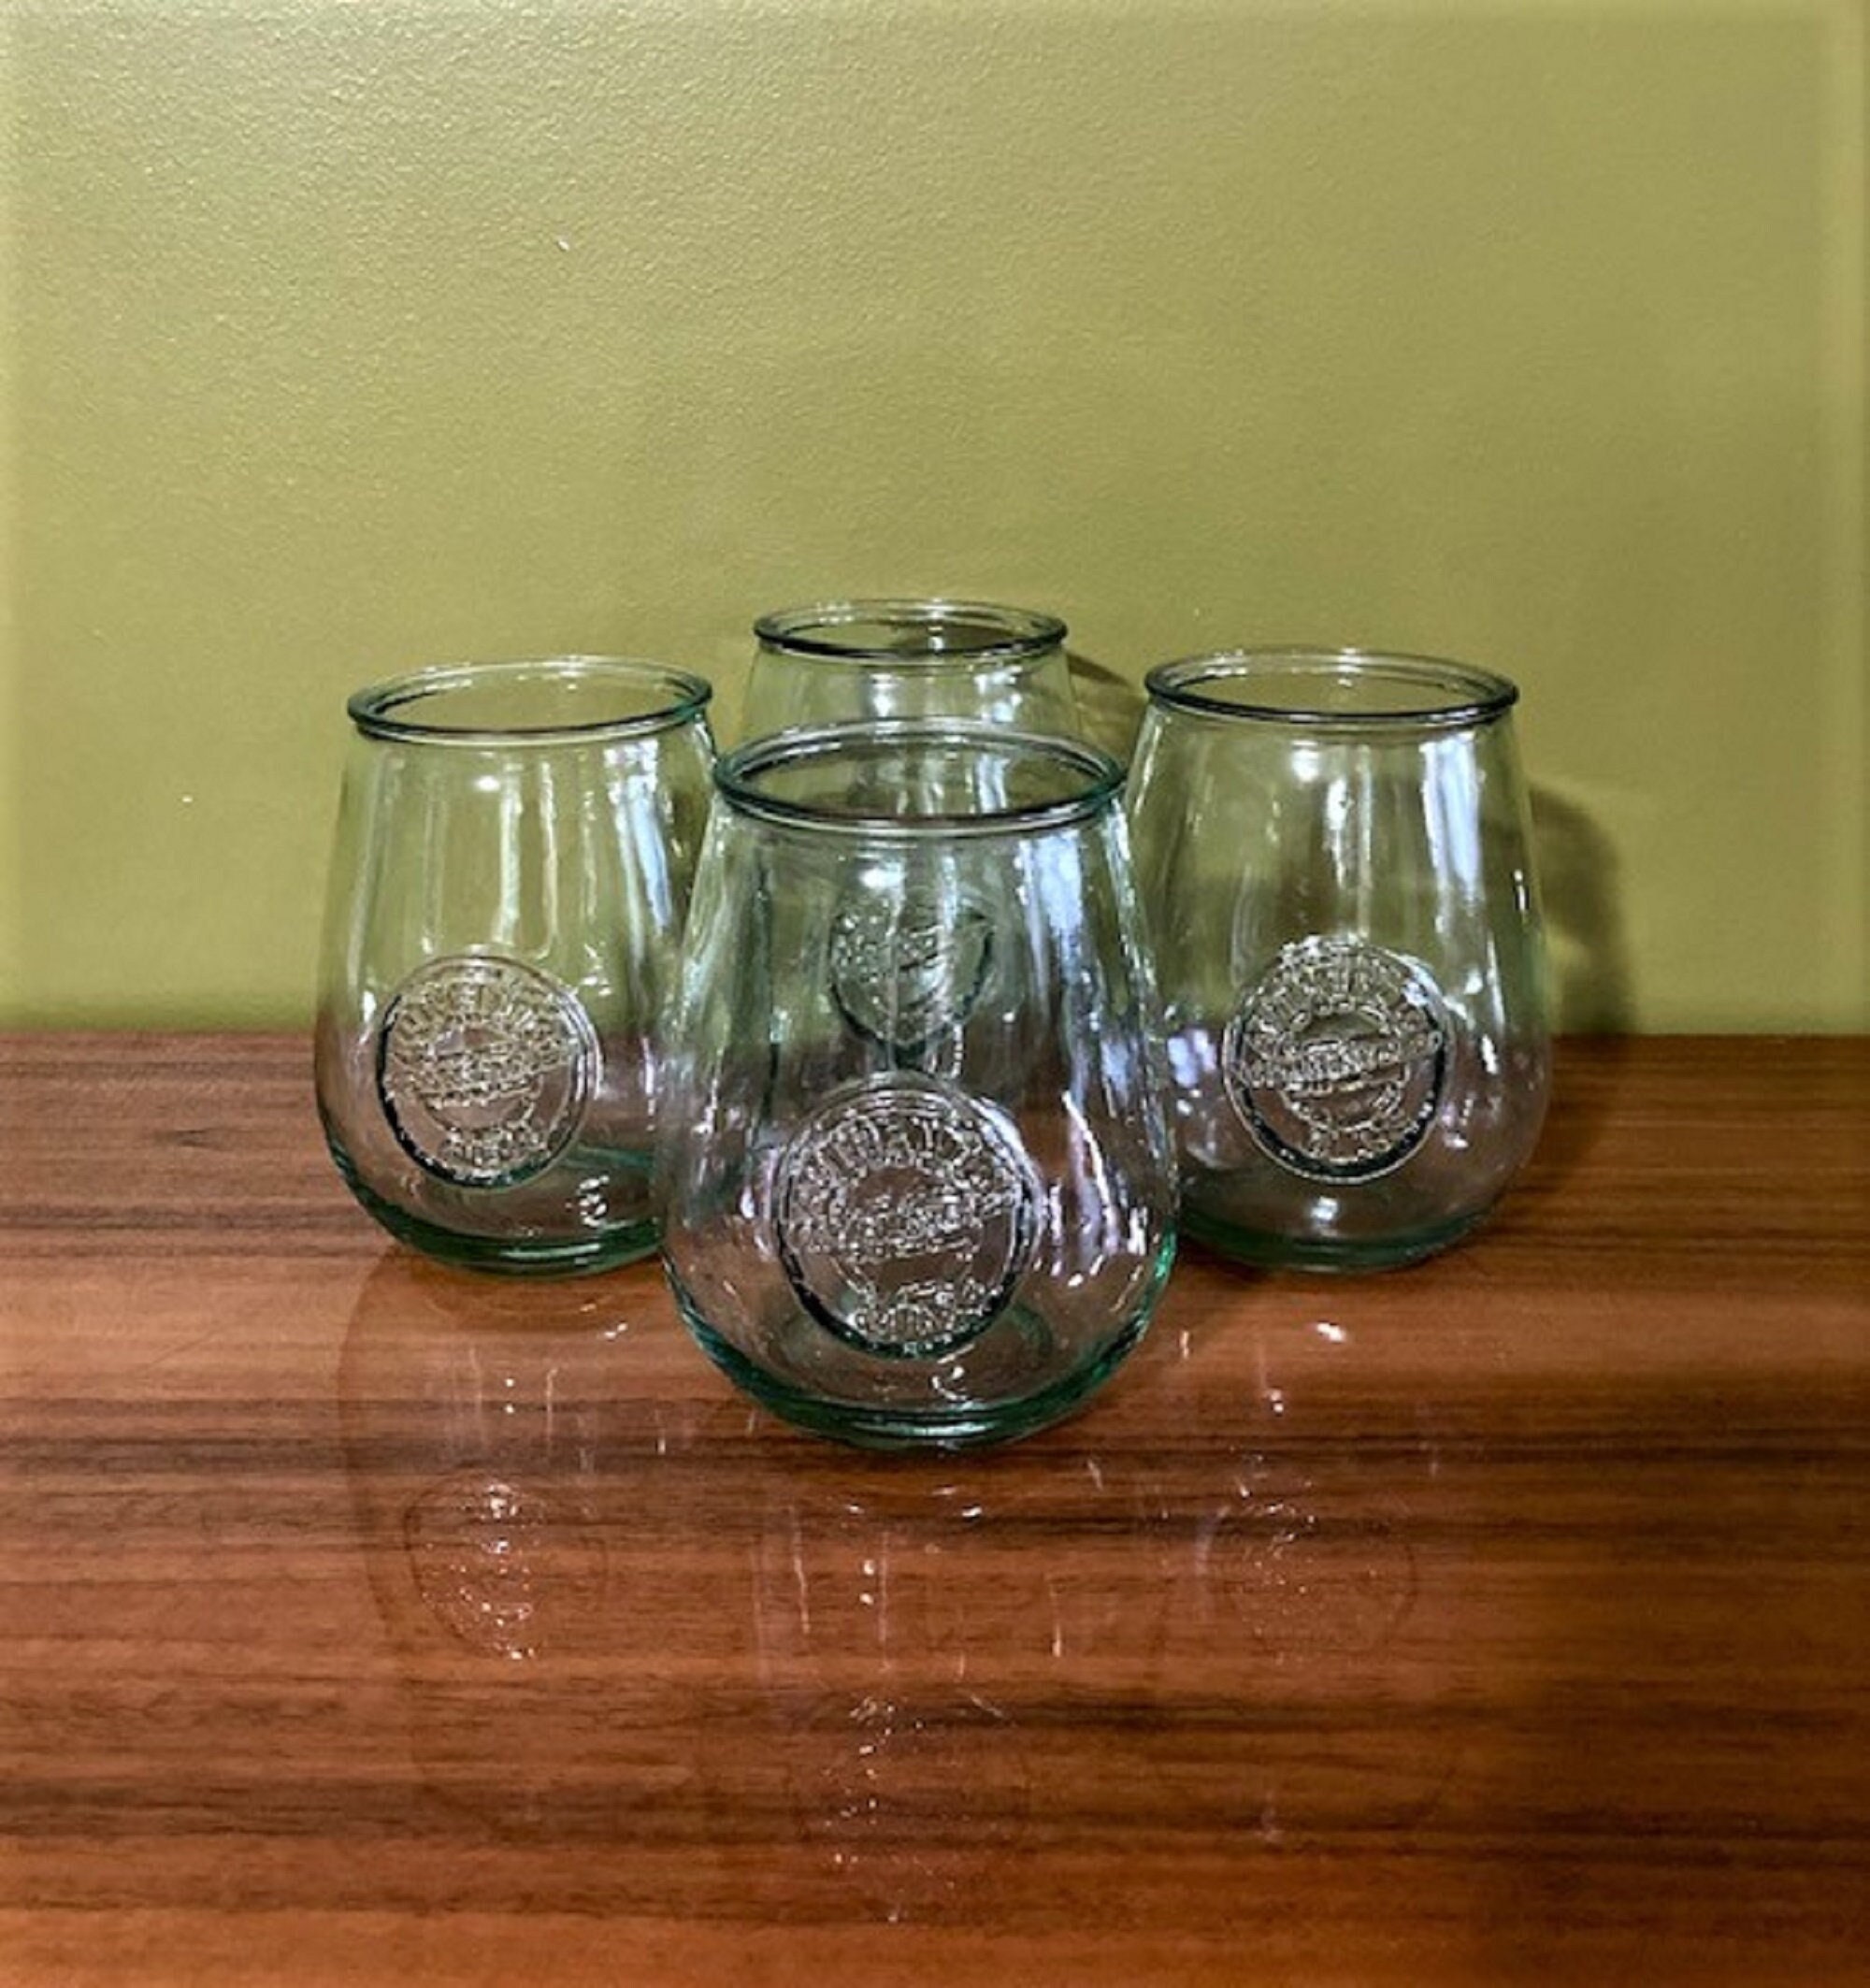 MexHandcraft Clear Blown 10 oz Tumbler Glasses, set of 6, Mexican Handmade  Glassware, Recycled Glass, Lead & Toxin Free (Tumbler)